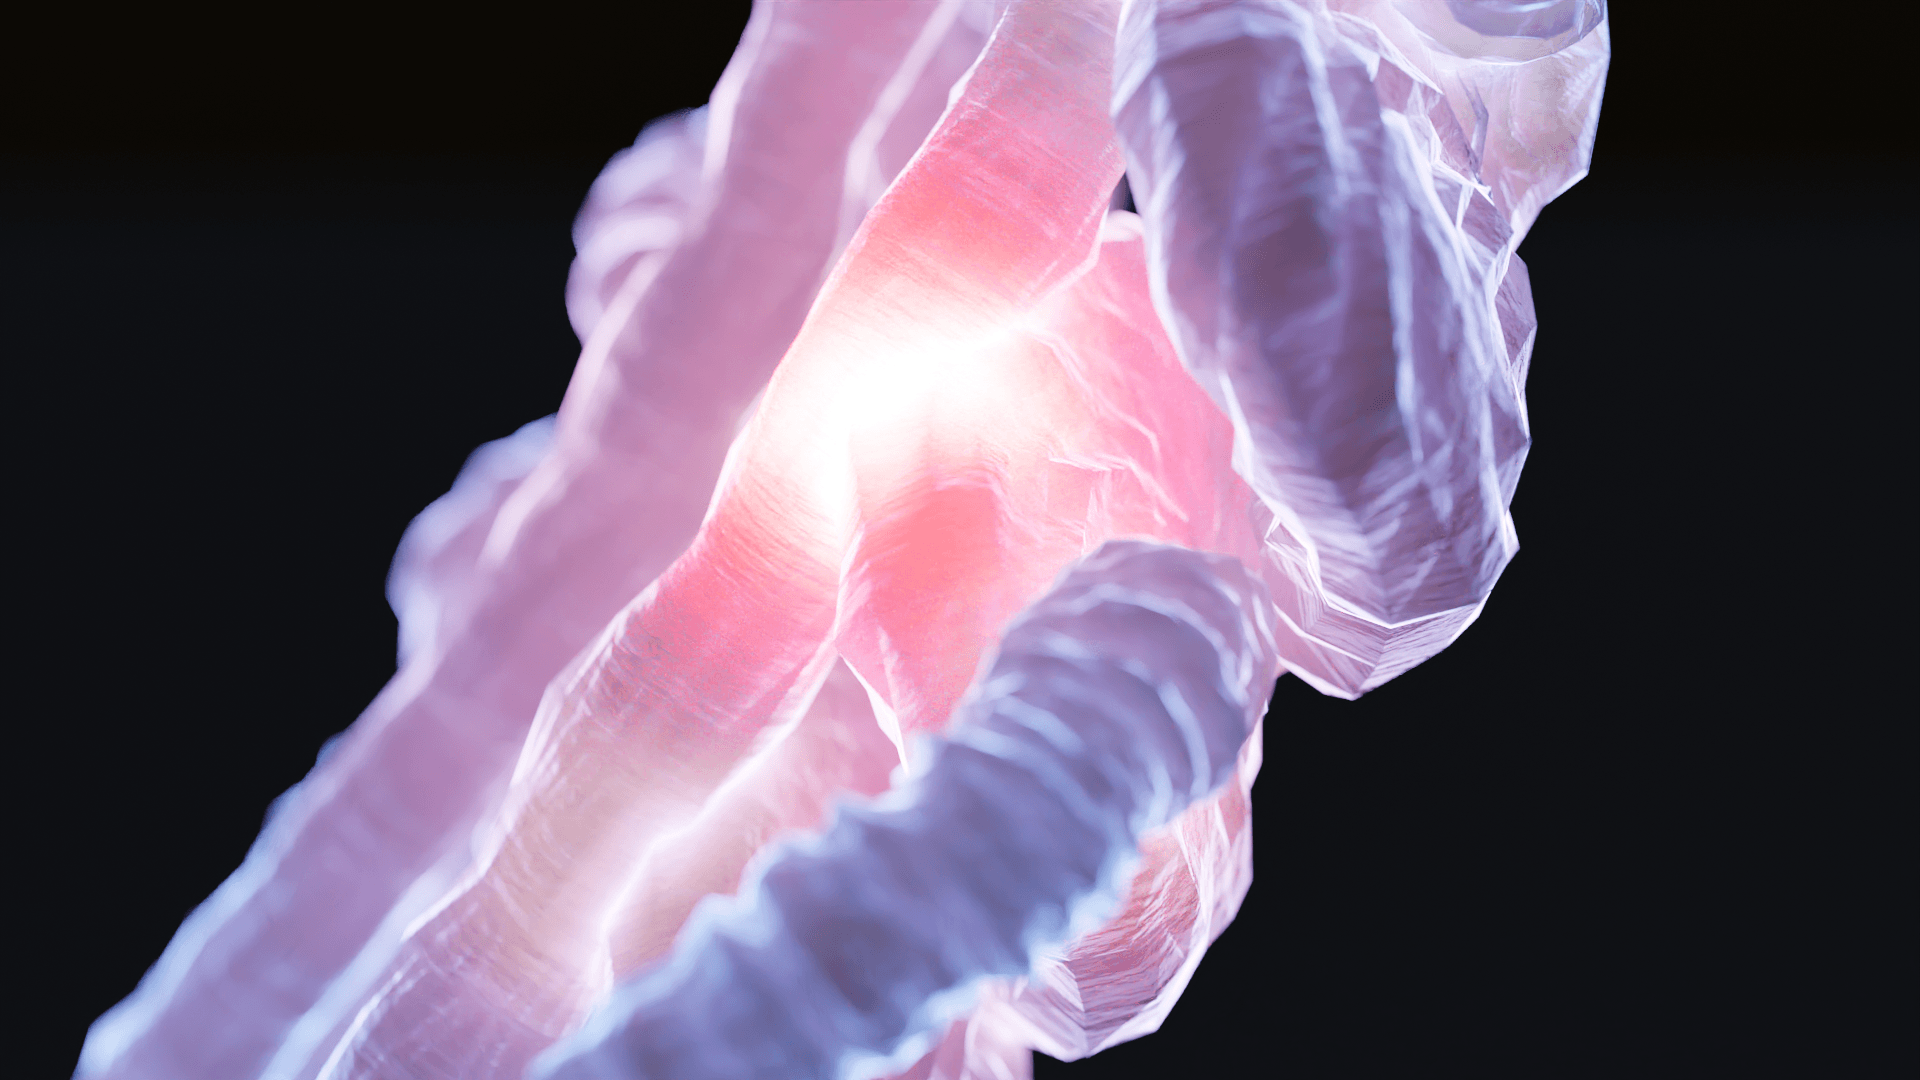 This is a close up image of a nerve axon, showing a glowing center where the nerve propagates.